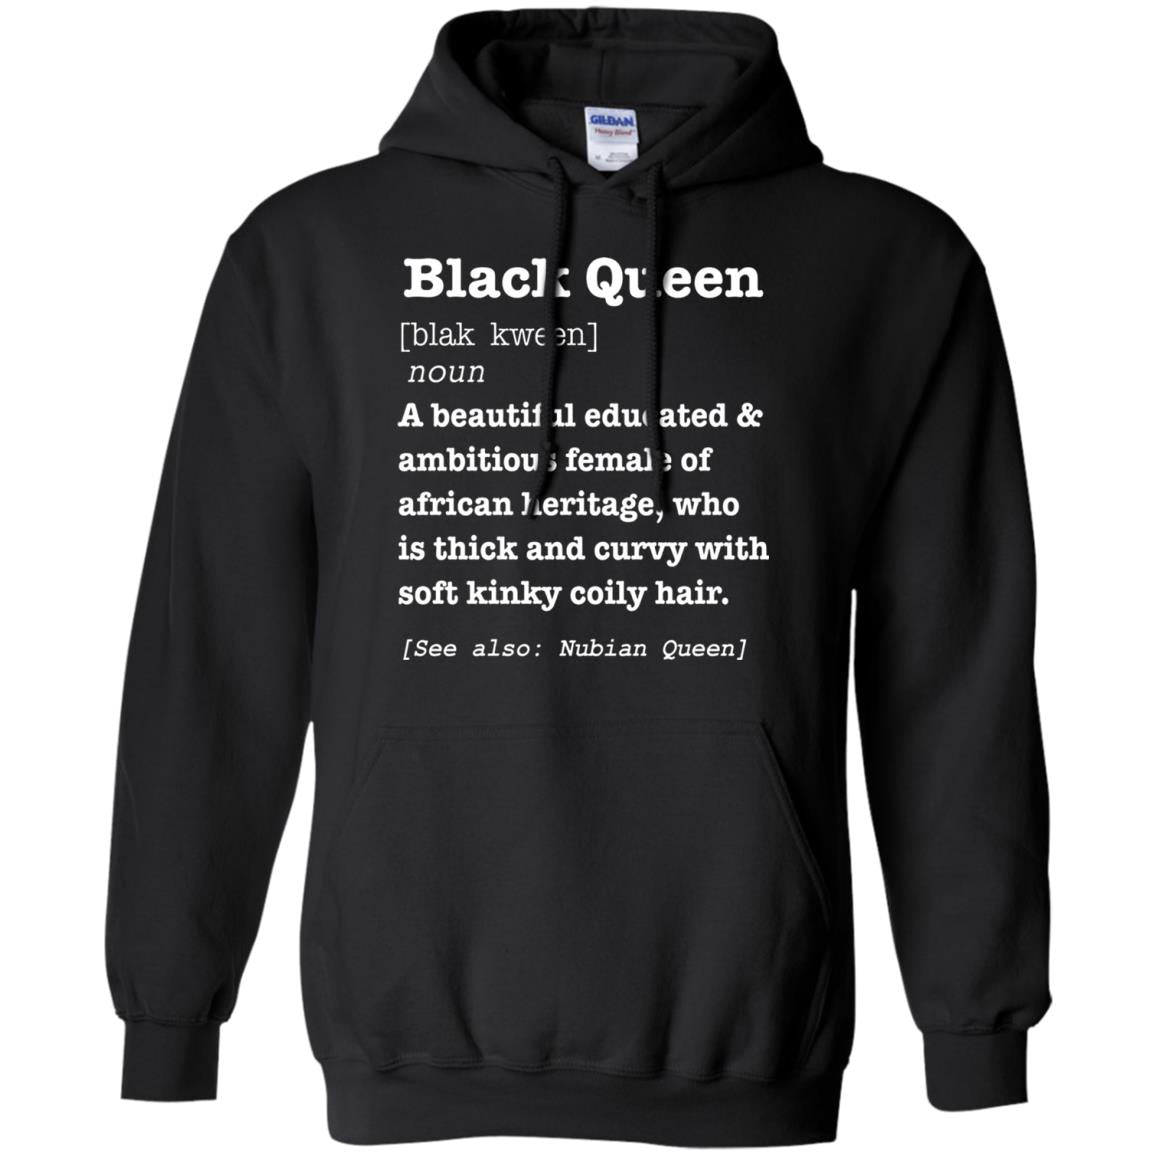 African Pride Melanin Educated T-shirt Black Queen Definition